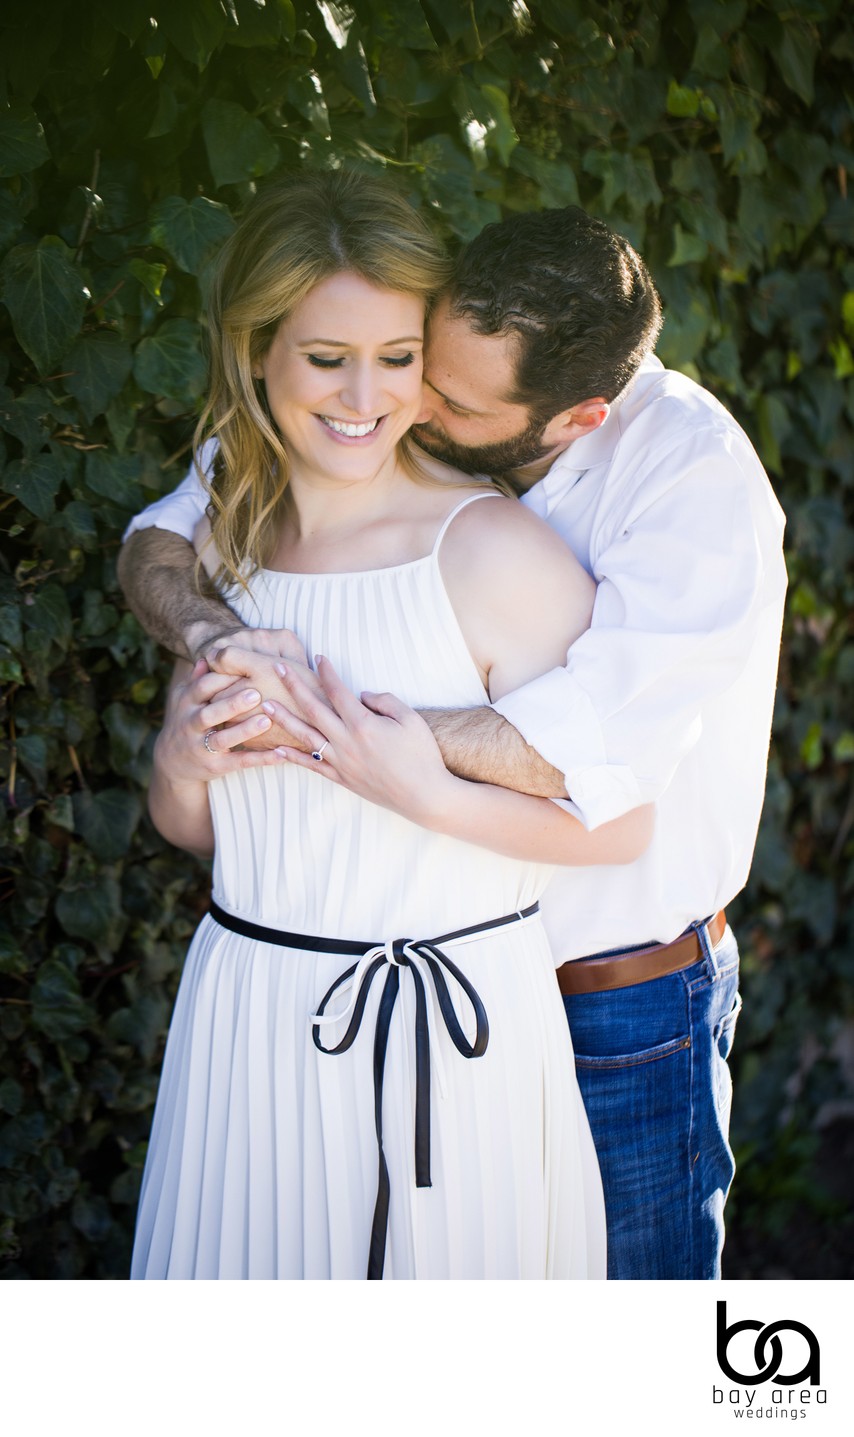 Top Engagement Photographer in the Bay Area